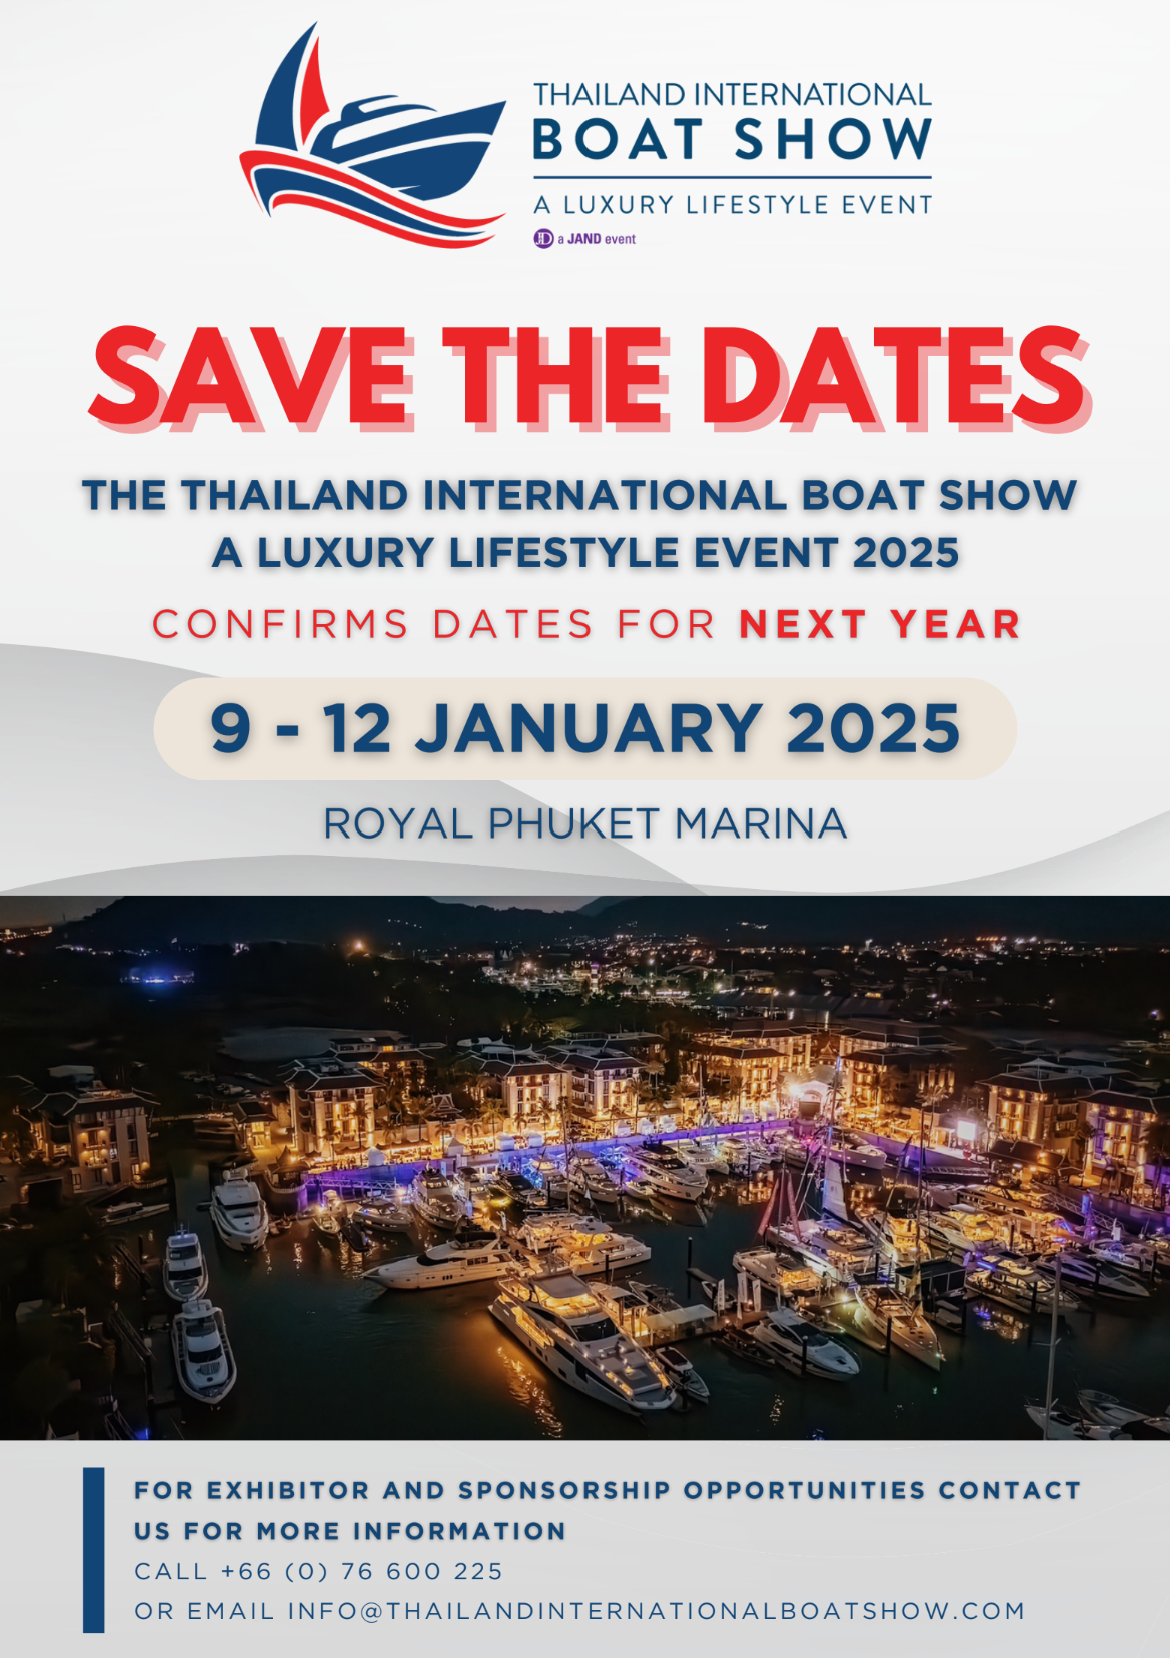 SAVE THE DATES for The Thailand International Boat Show A Luxury Lifestyle Event 2025